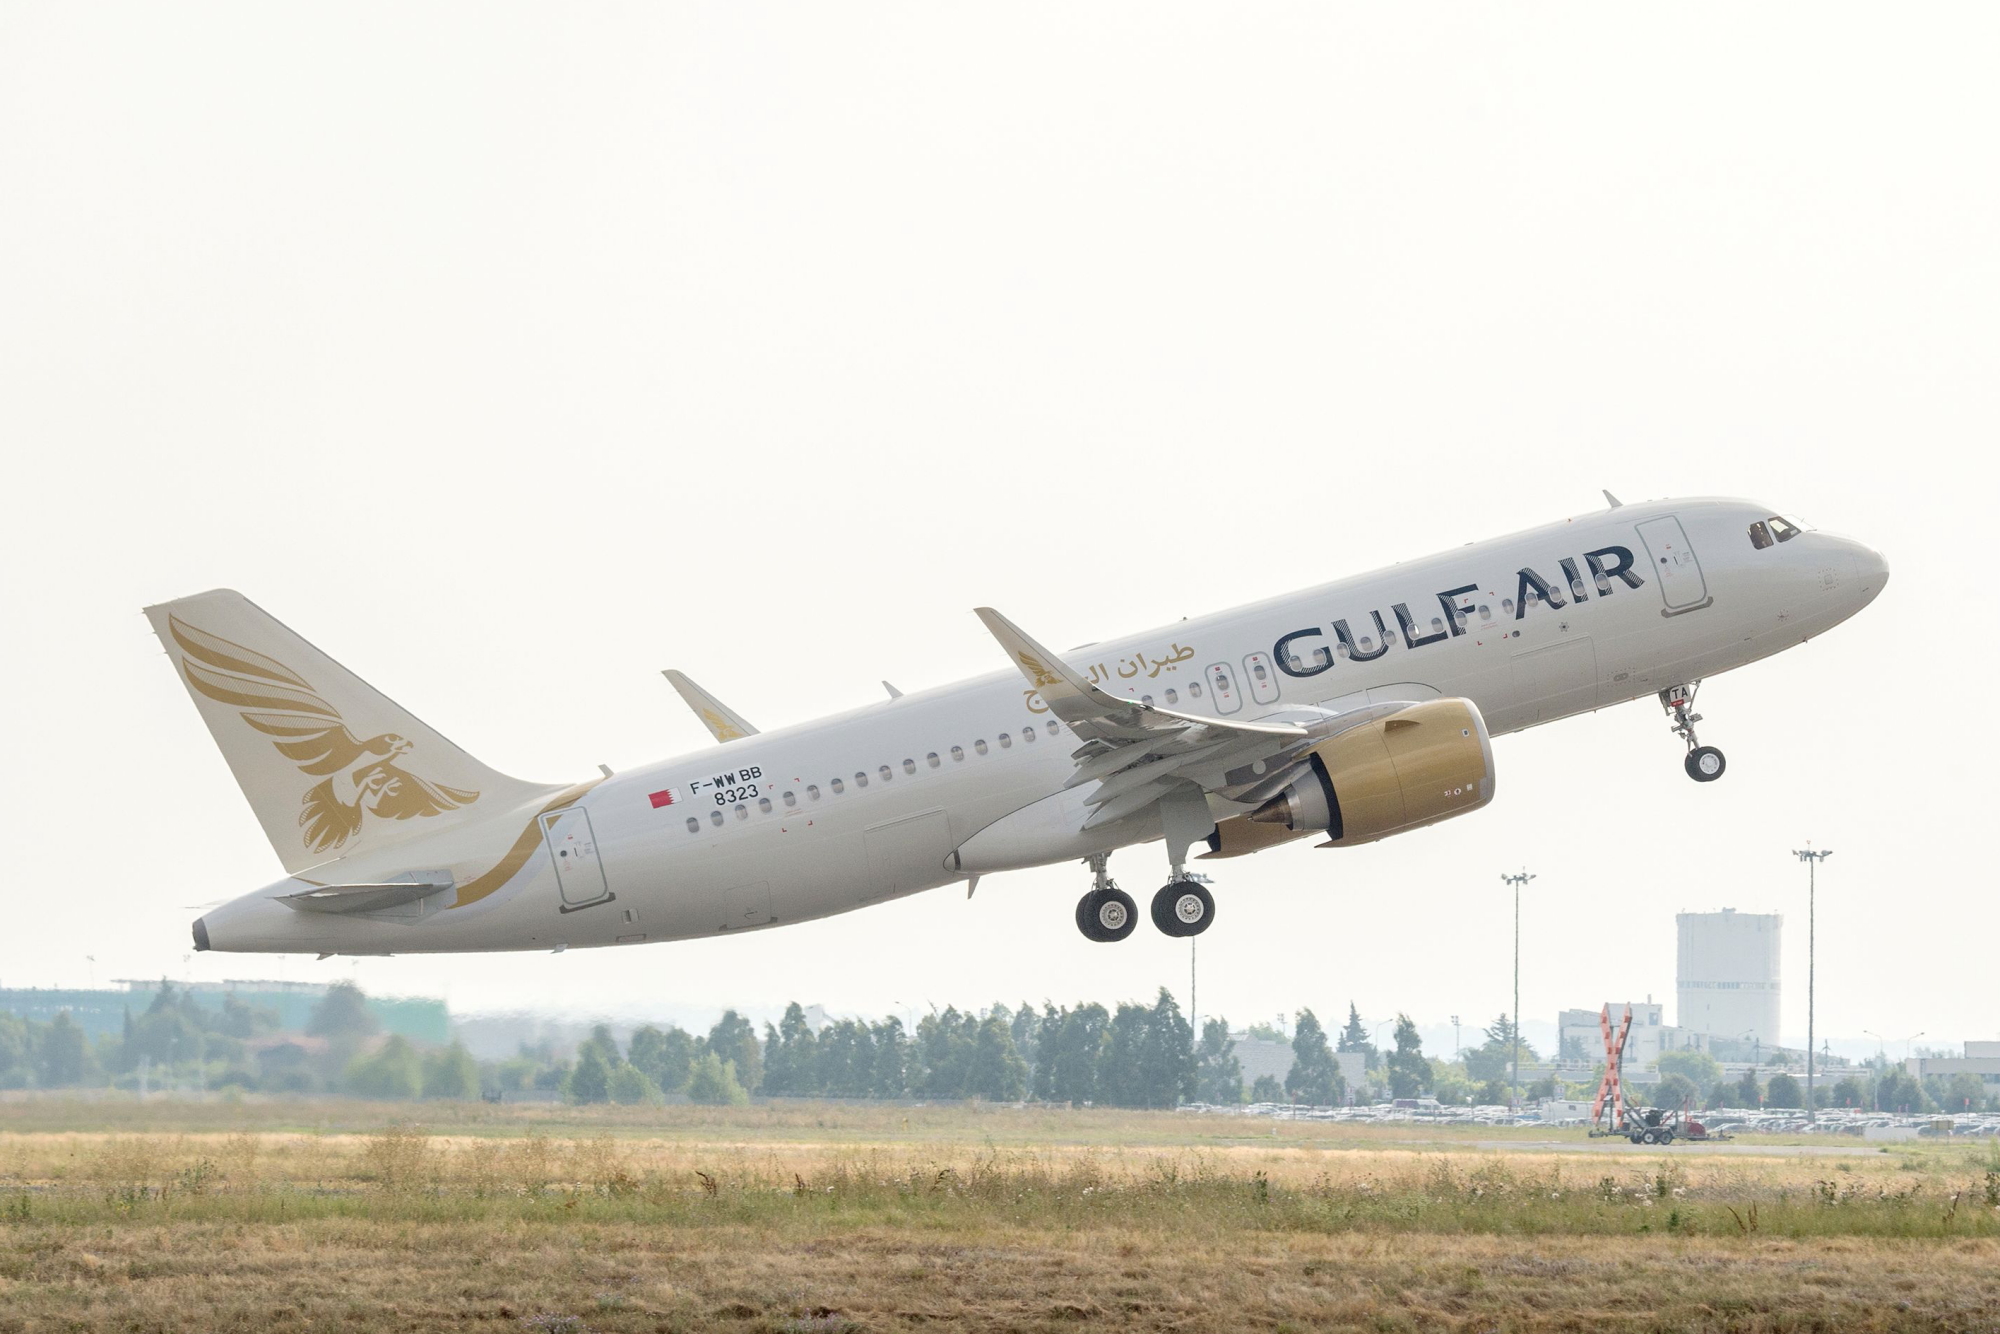 Gulf Air A320neo MSN 8323. Click to enlarge.